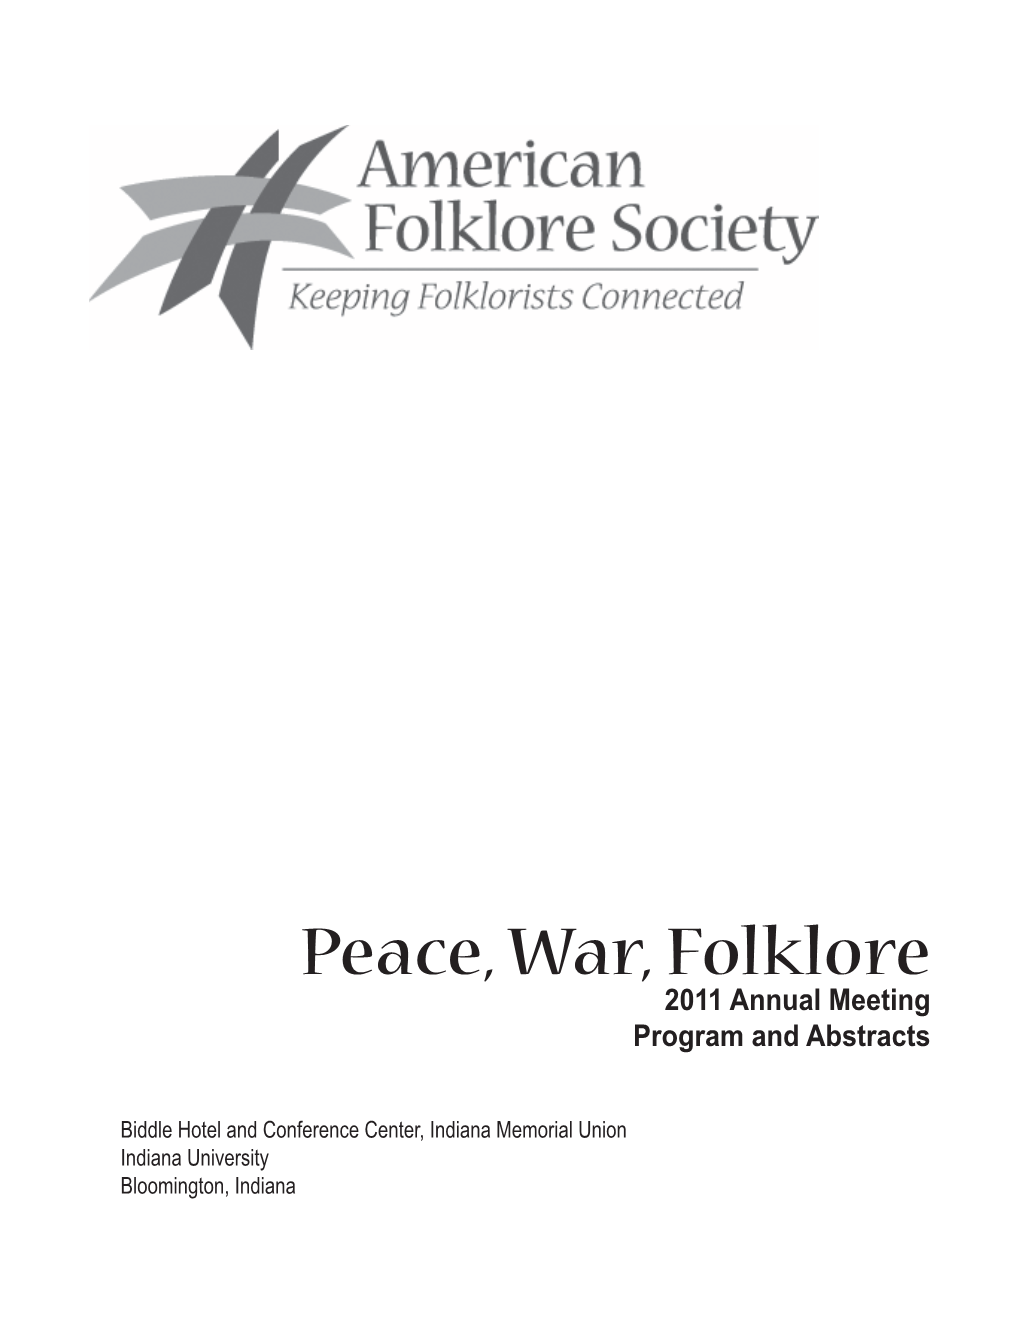 Peace, War, Folklore 2011 Annual Meeting Program and Abstracts